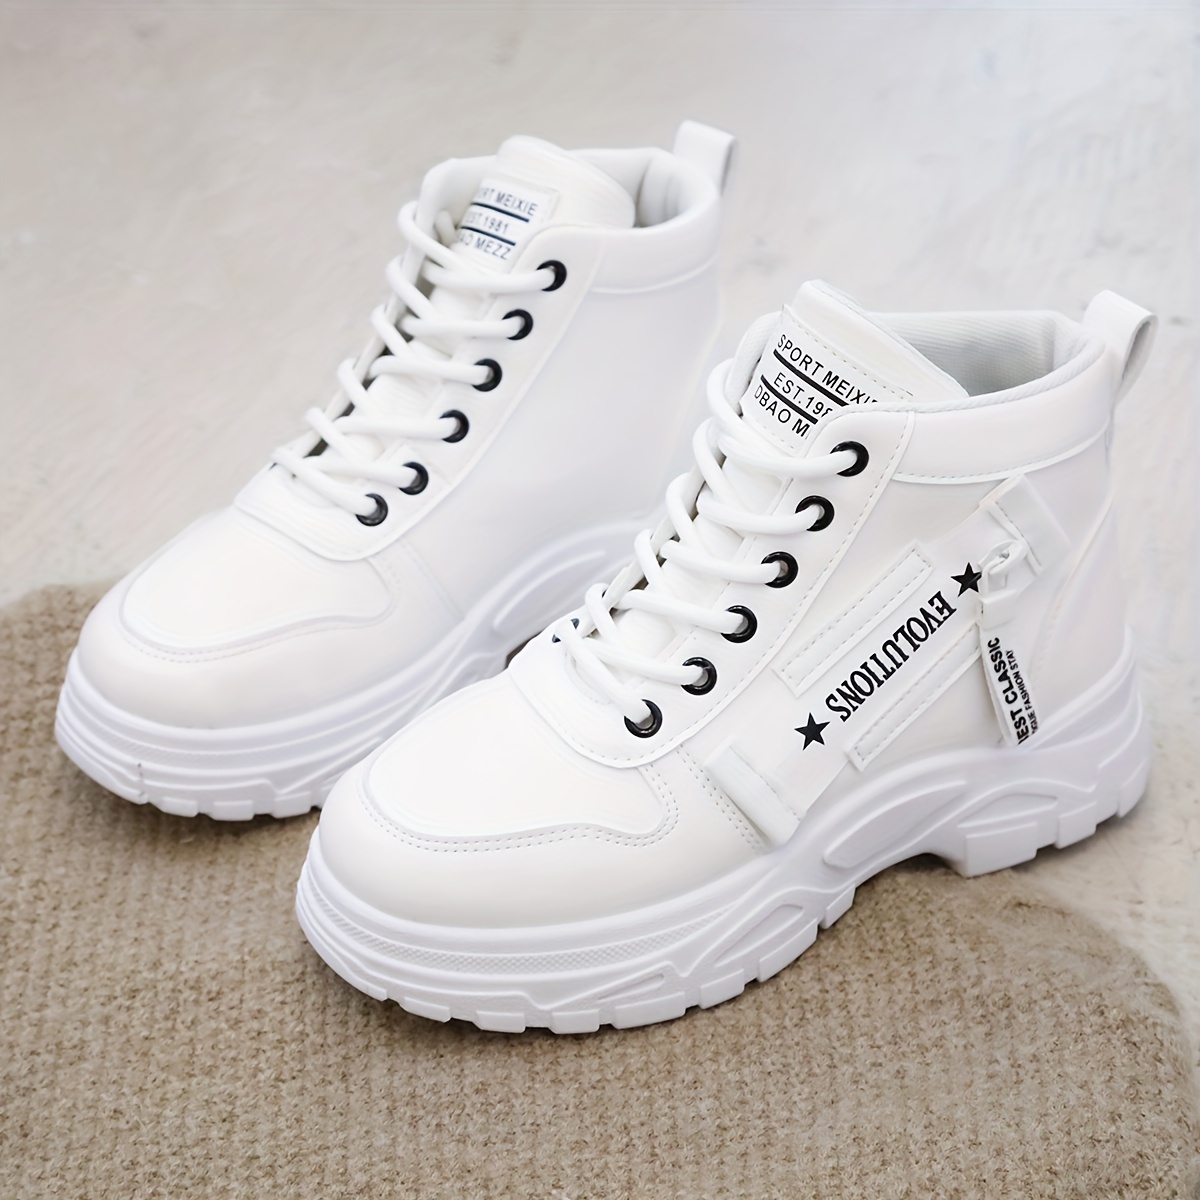 womens plush lined sneakers winter warm lace up high top ankle boots thermal outdoor shoes details 4